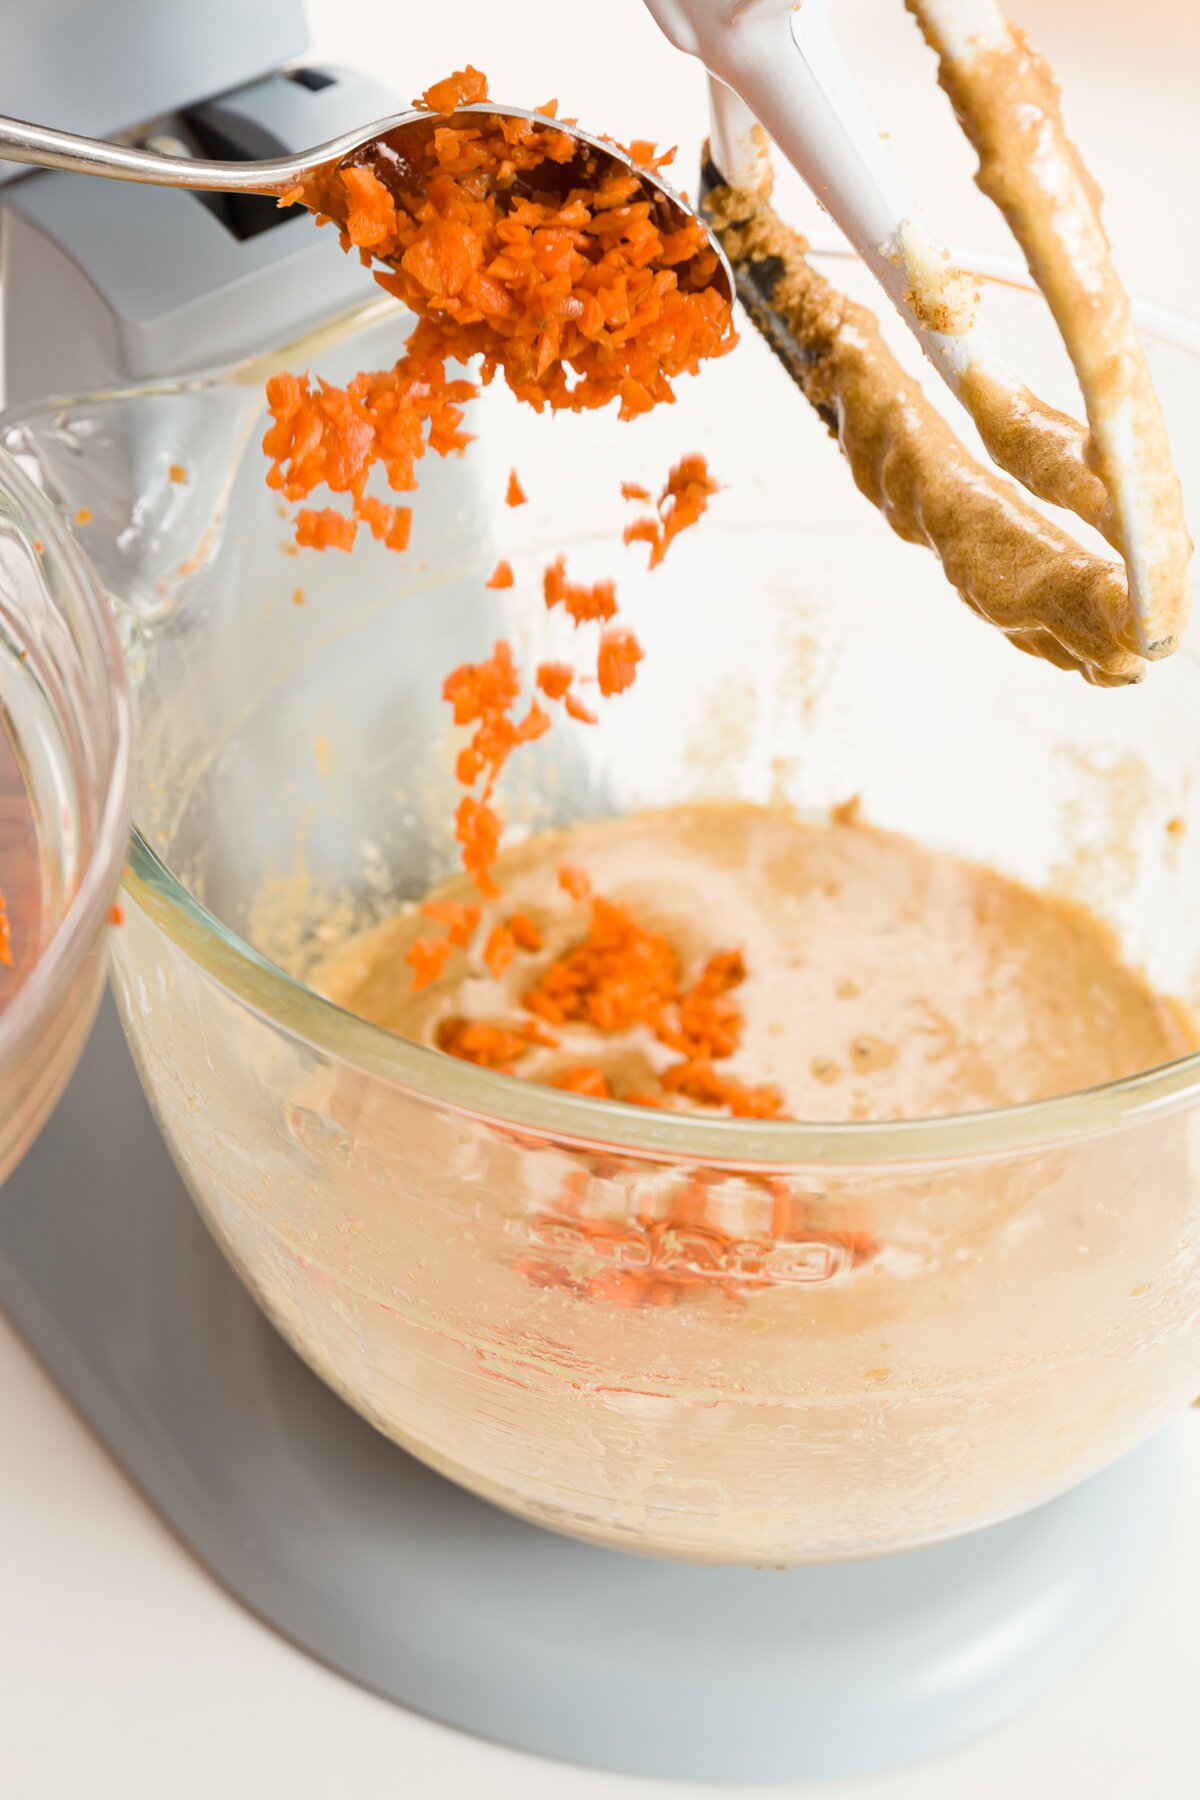 Carrot pouring into bowl of a stand mixer